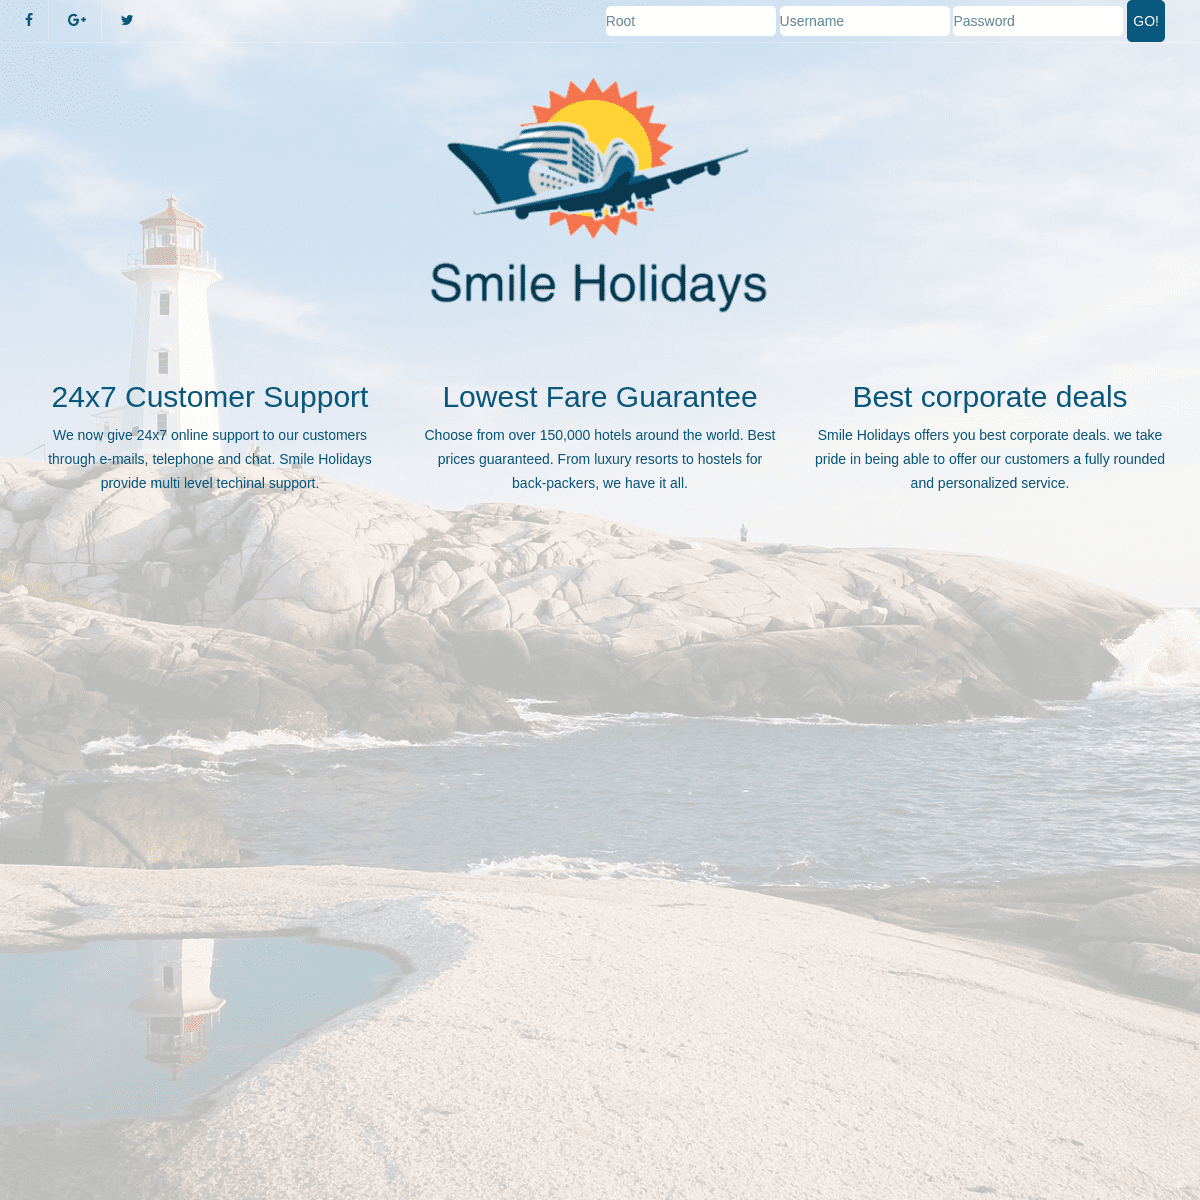 A complete backup of smileholidays.info